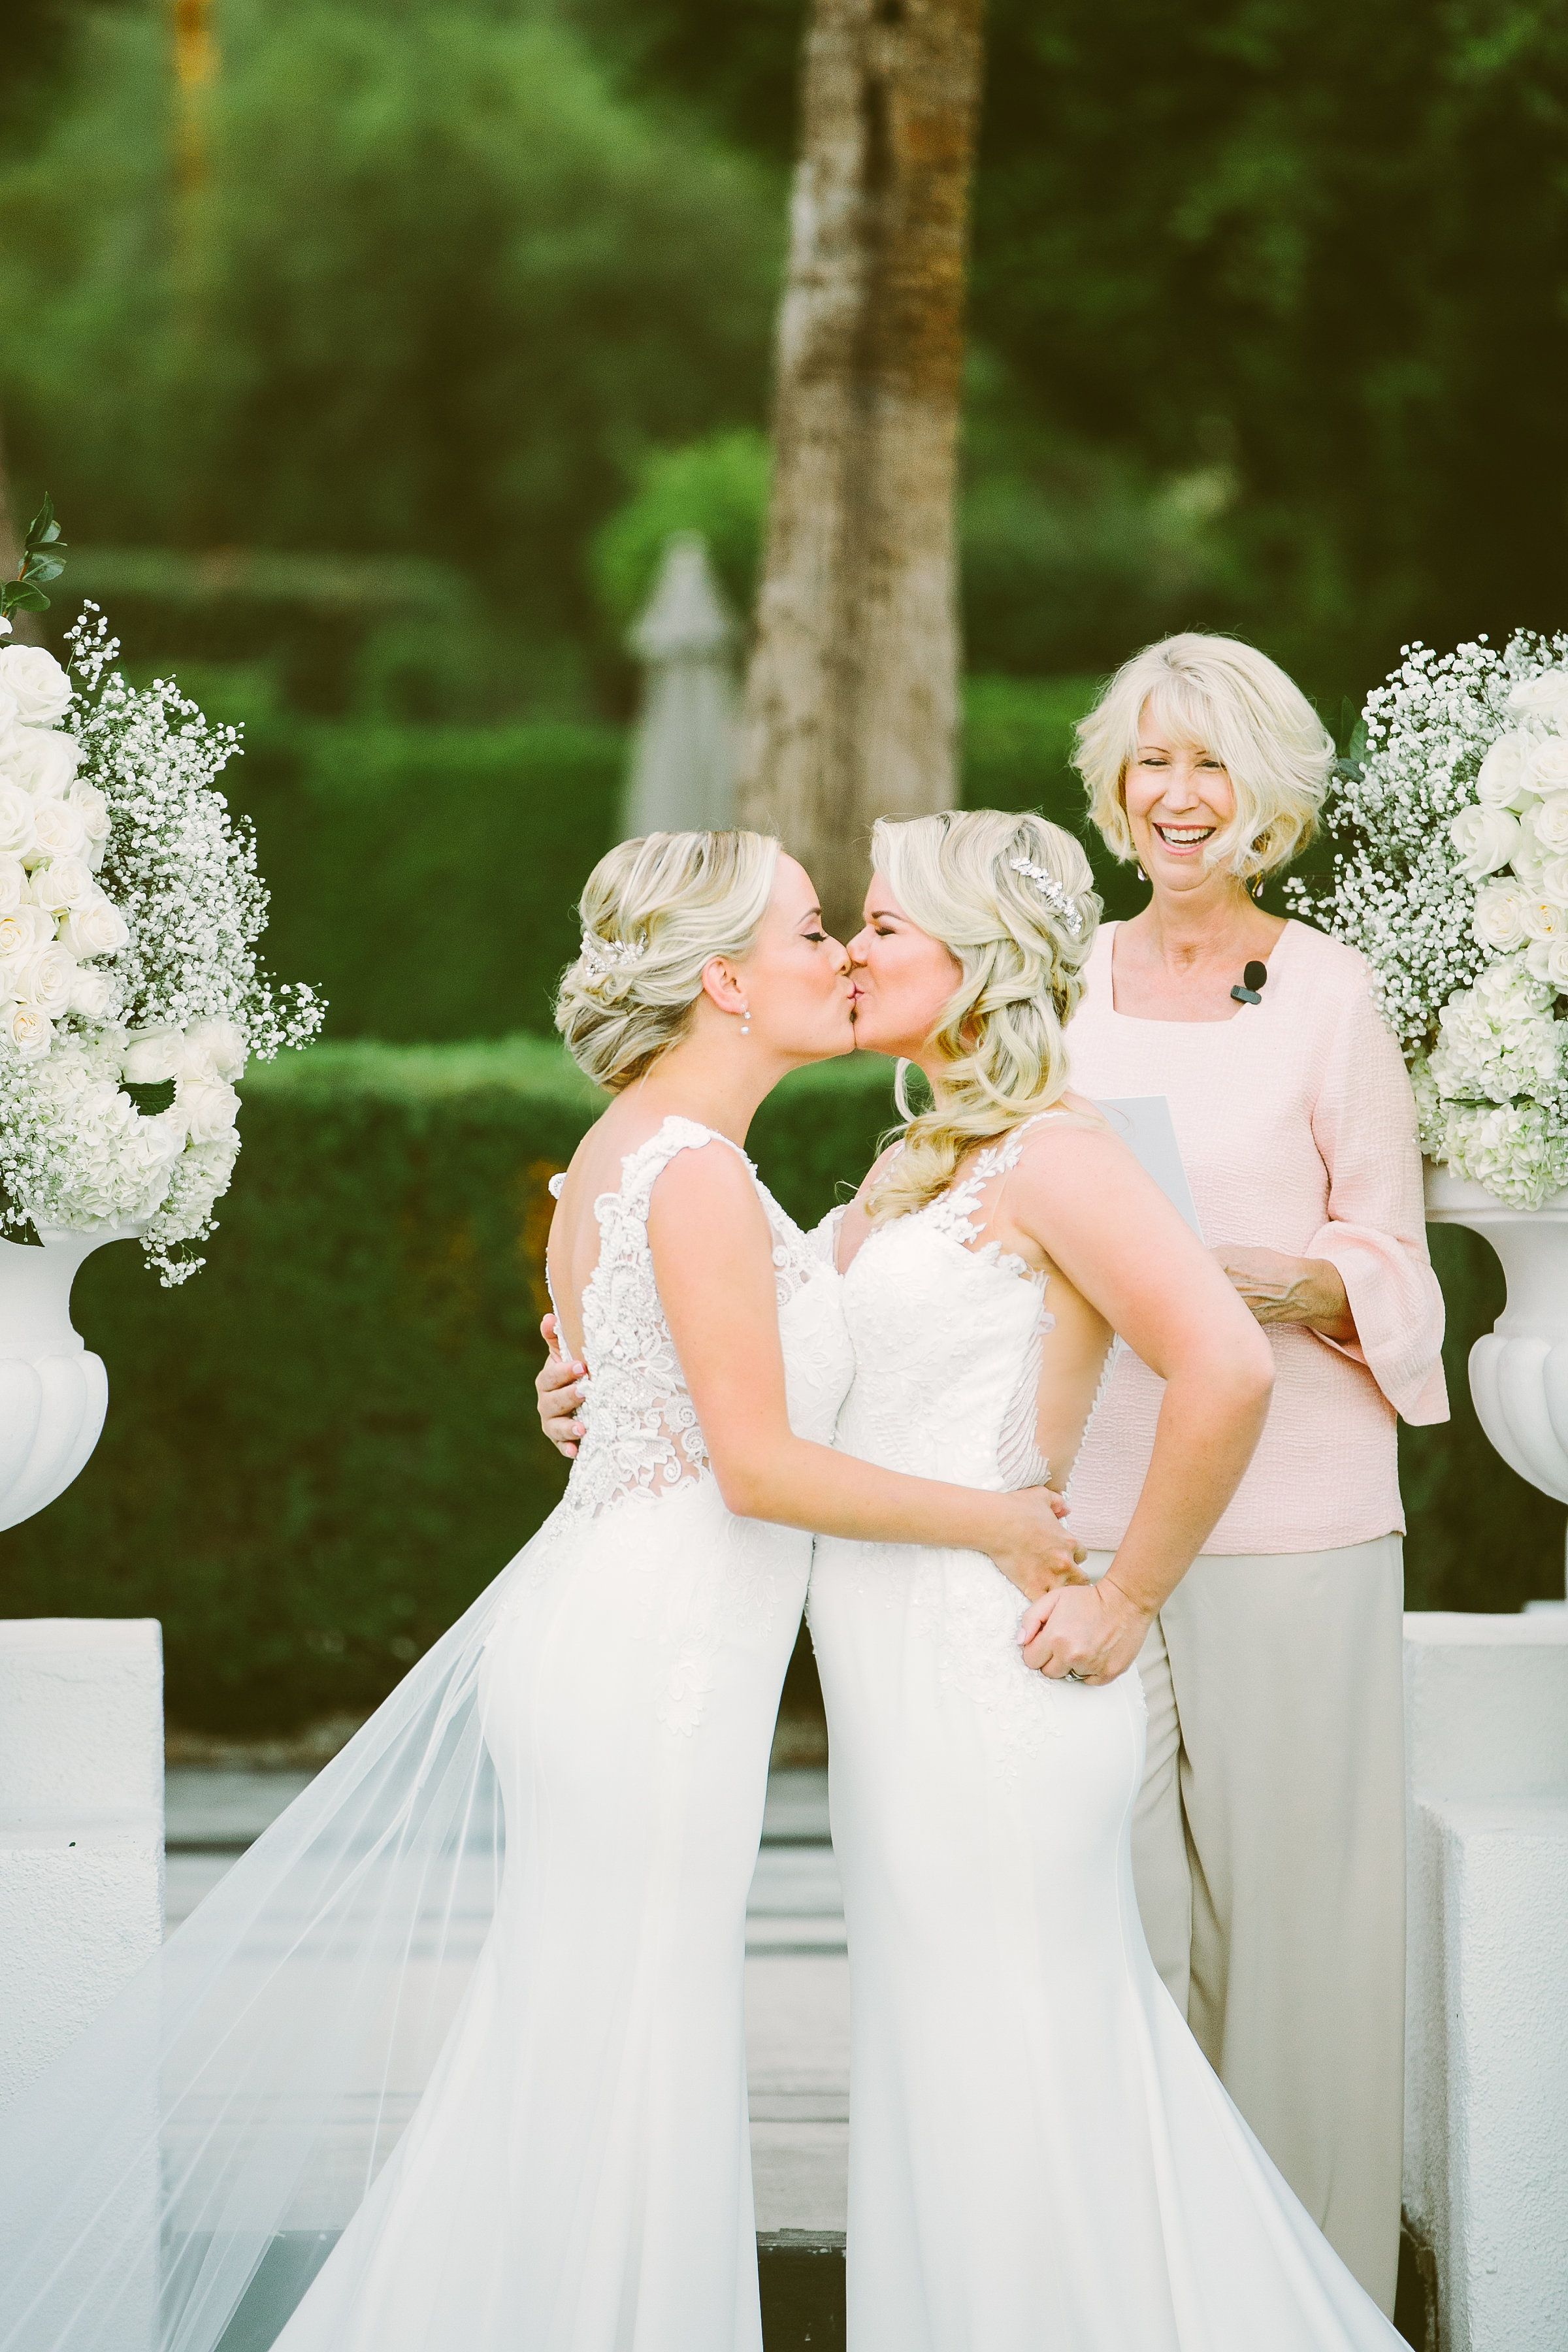 Lesbian wedding planning advice and tips image